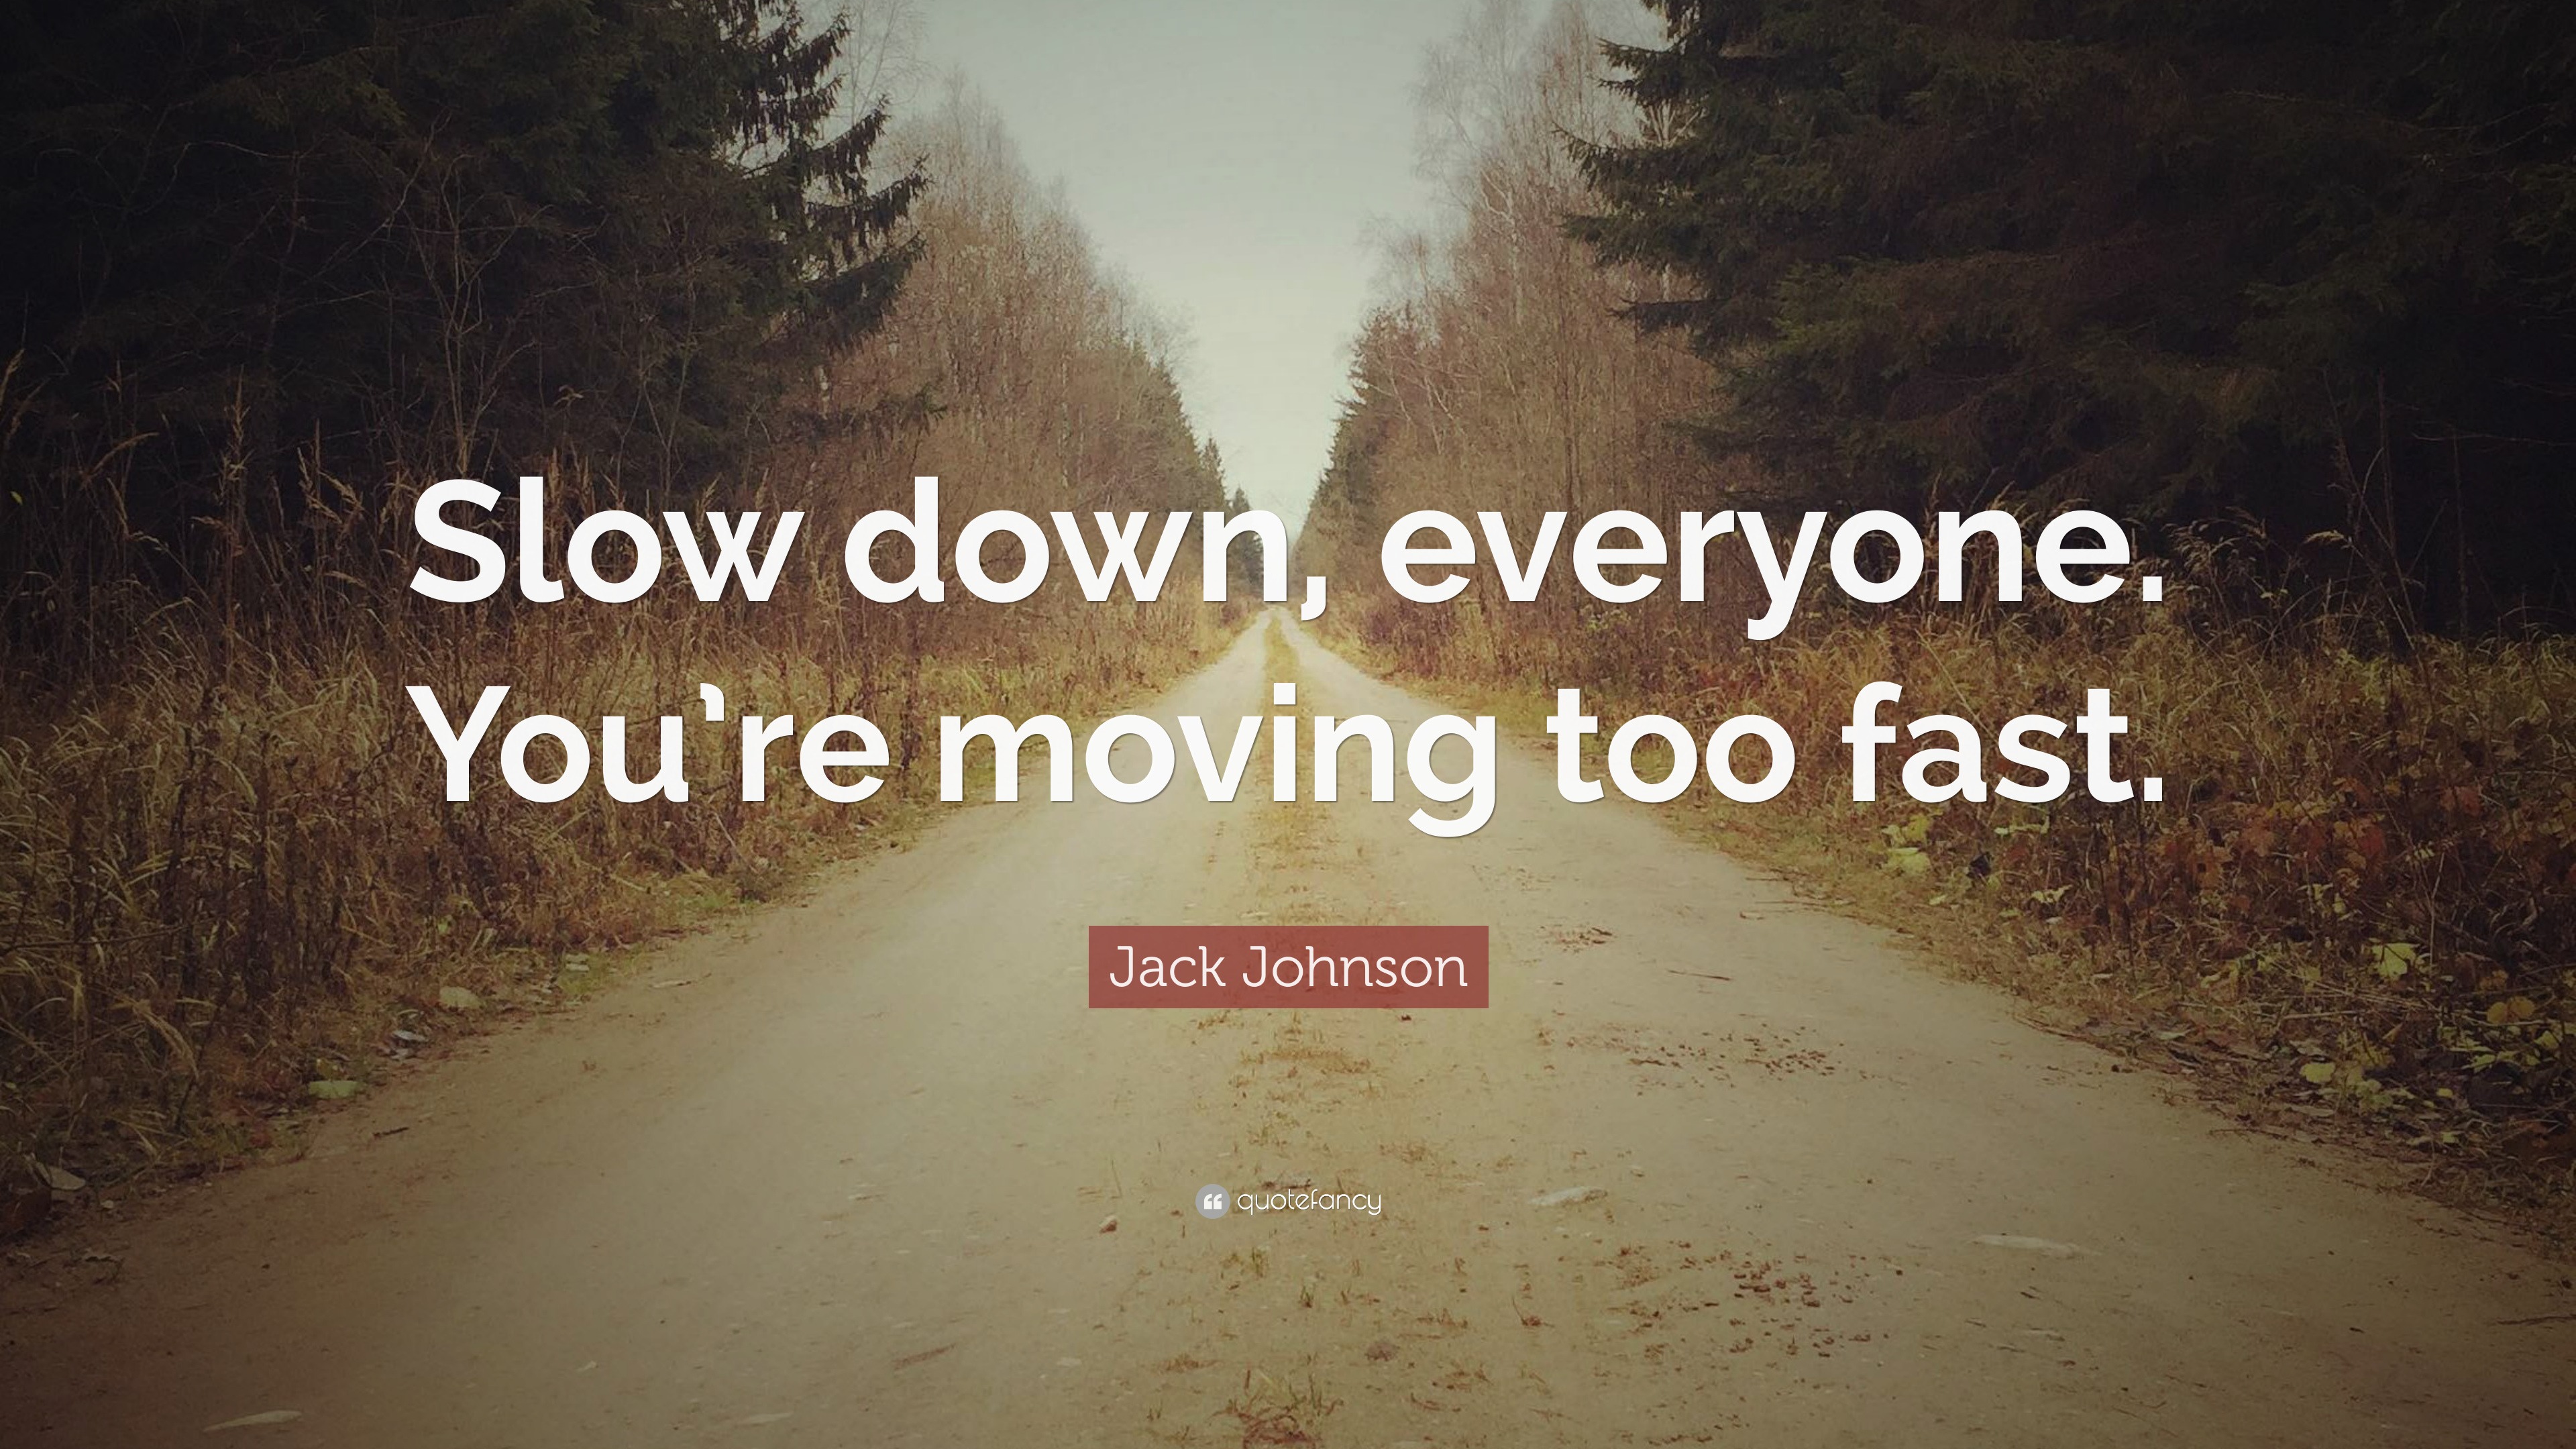 Jack Johnson Quote: “Slow down, everyone. You’re moving too fast.”